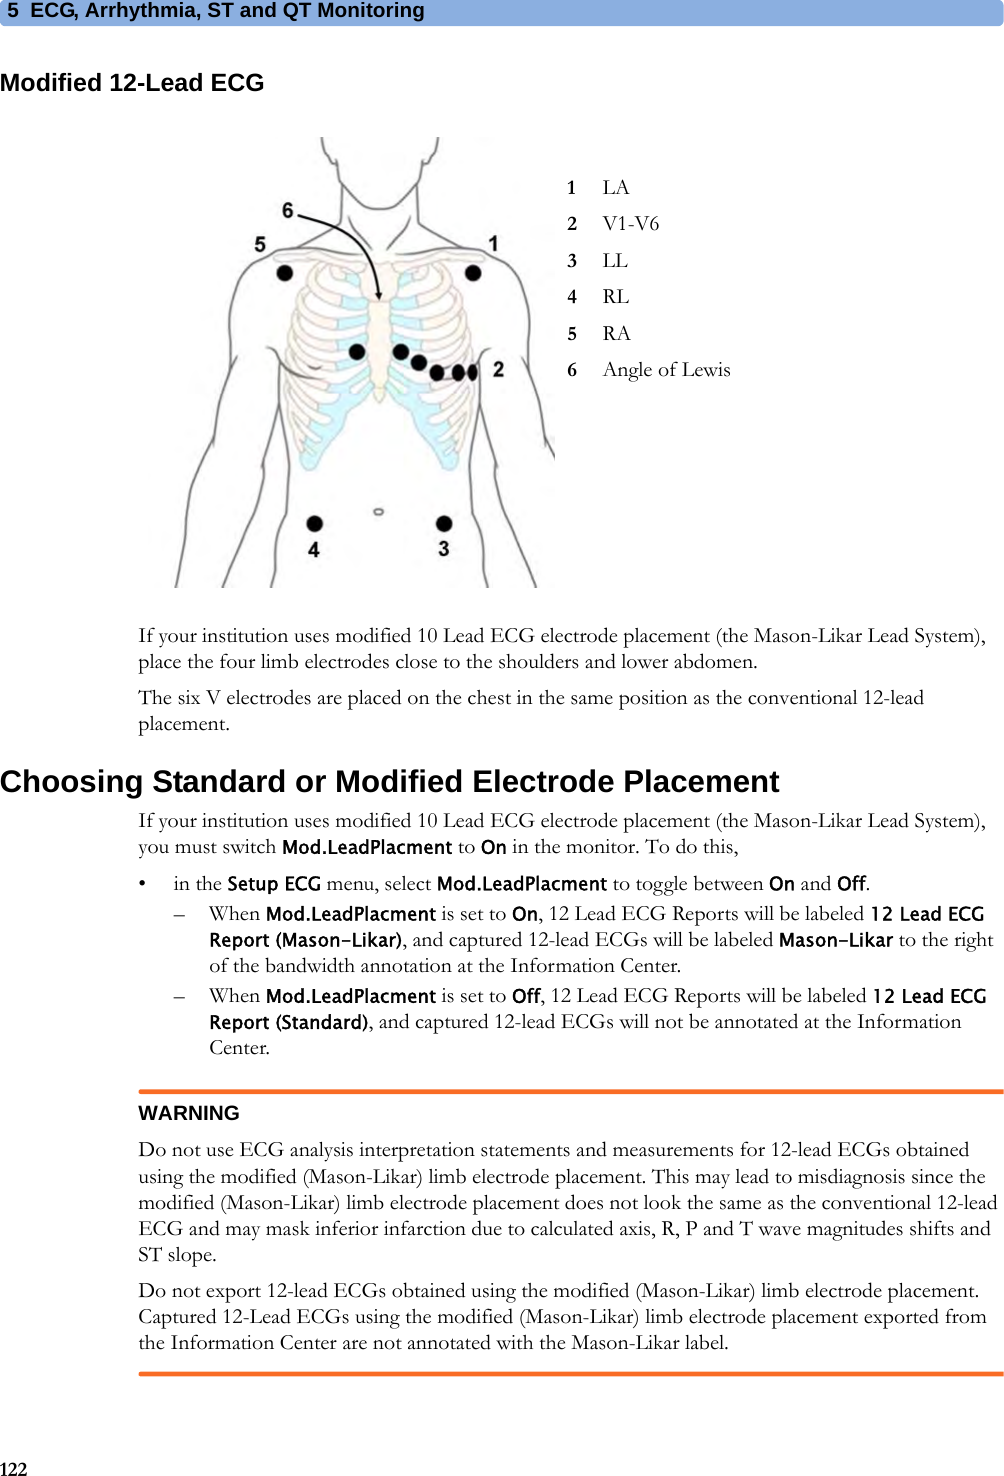 5 ECG, Arrhythmia, ST and QT Monitoring122Modified 12-Lead ECGIf your institution uses modified 10 Lead ECG electrode placement (the Mason-Likar Lead System), place the four limb electrodes close to the shoulders and lower abdomen.The six V electrodes are placed on the chest in the same position as the conventional 12-lead placement.Choosing Standard or Modified Electrode PlacementIf your institution uses modified 10 Lead ECG electrode placement (the Mason-Likar Lead System), you must switch Mod.LeadPlacment to On in the monitor. To do this,•in the Setup ECG menu, select Mod.LeadPlacment to toggle between On and Off.– When Mod.LeadPlacment is set to On, 12 Lead ECG Reports will be labeled 12 Lead ECG Report (Mason-Likar), and captured 12-lead ECGs will be labeled Mason-Likar to the right of the bandwidth annotation at the Information Center.– When Mod.LeadPlacment is set to Off, 12 Lead ECG Reports will be labeled 12 Lead ECG Report (Standard), and captured 12-lead ECGs will not be annotated at the Information Center.WARNINGDo not use ECG analysis interpretation statements and measurements for 12-lead ECGs obtained using the modified (Mason-Likar) limb electrode placement. This may lead to misdiagnosis since the modified (Mason-Likar) limb electrode placement does not look the same as the conventional 12-lead ECG and may mask inferior infarction due to calculated axis, R, P and T wave magnitudes shifts and ST slope.Do not export 12-lead ECGs obtained using the modified (Mason-Likar) limb electrode placement. Captured 12-Lead ECGs using the modified (Mason-Likar) limb electrode placement exported from the Information Center are not annotated with the Mason-Likar label.1LA2V1-V63LL4RL5RA6Angle of Lewis